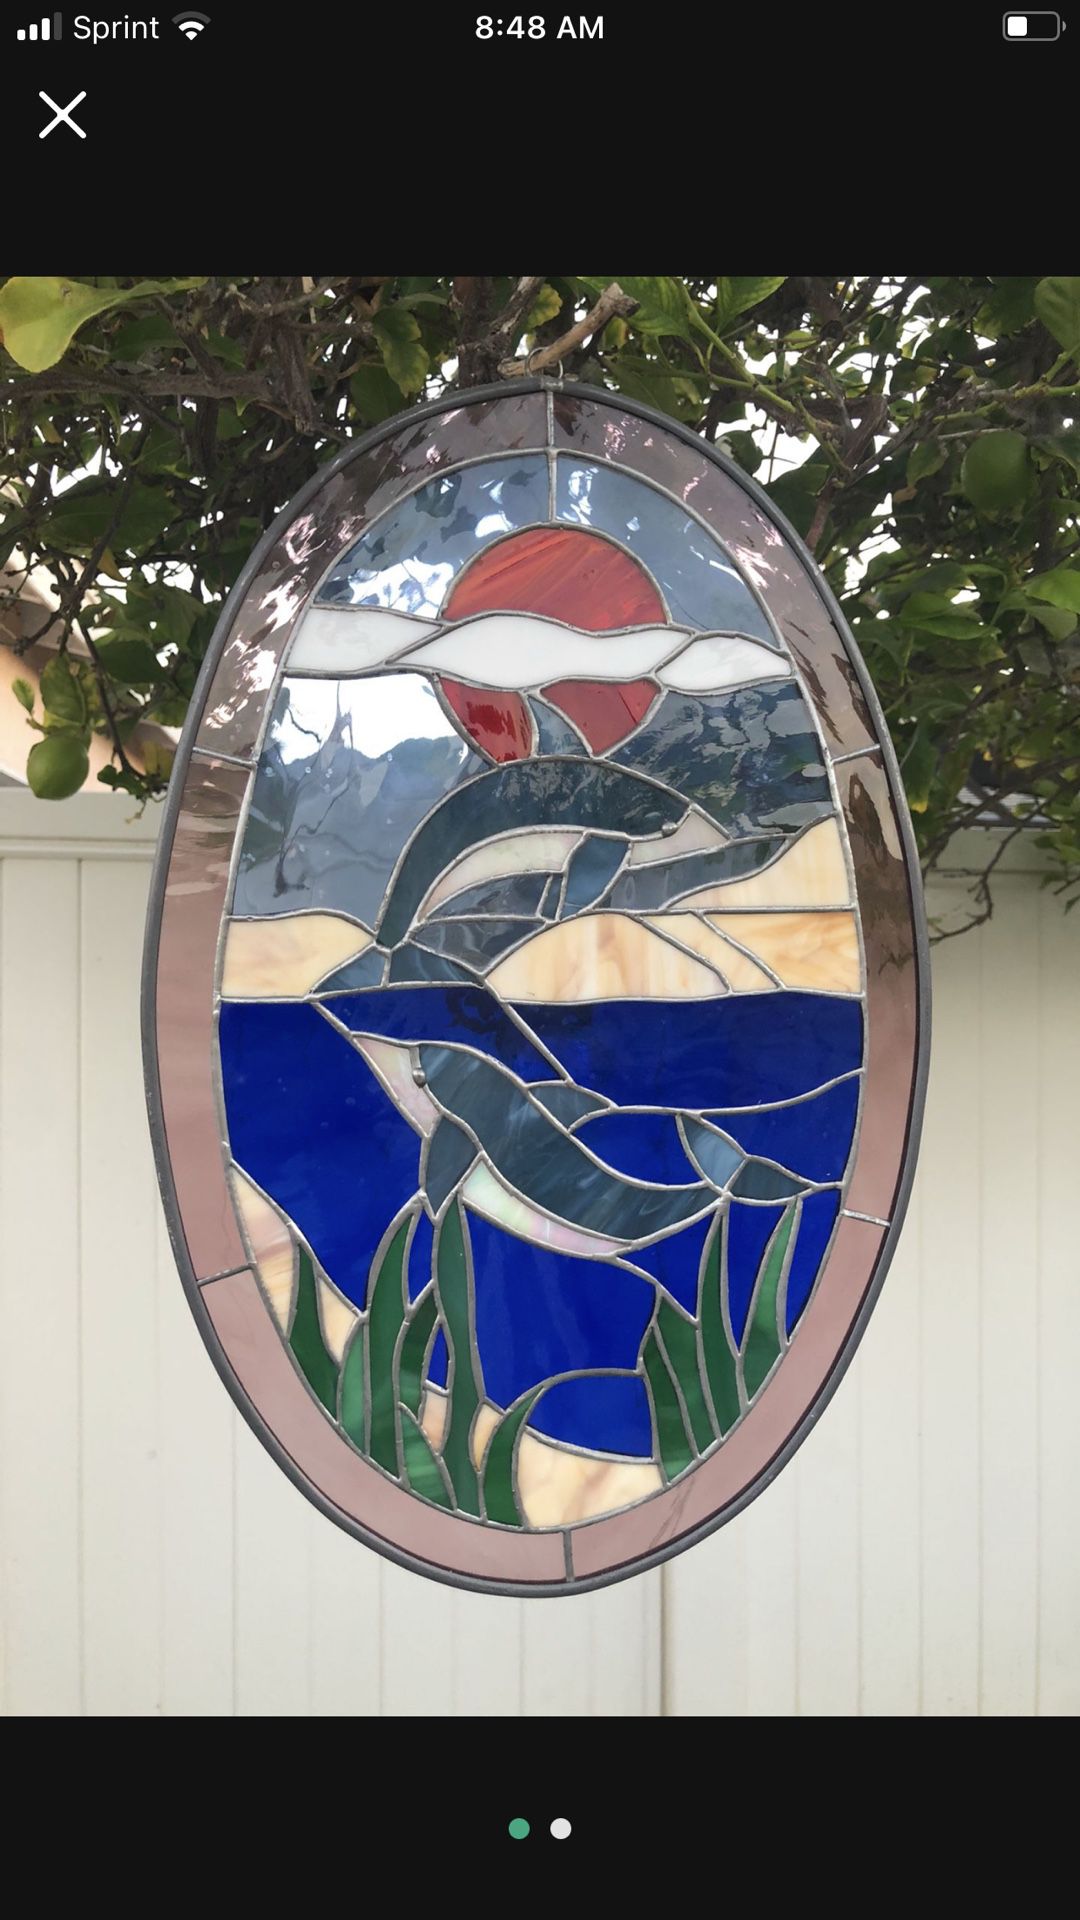 Stained Glass Wall Art